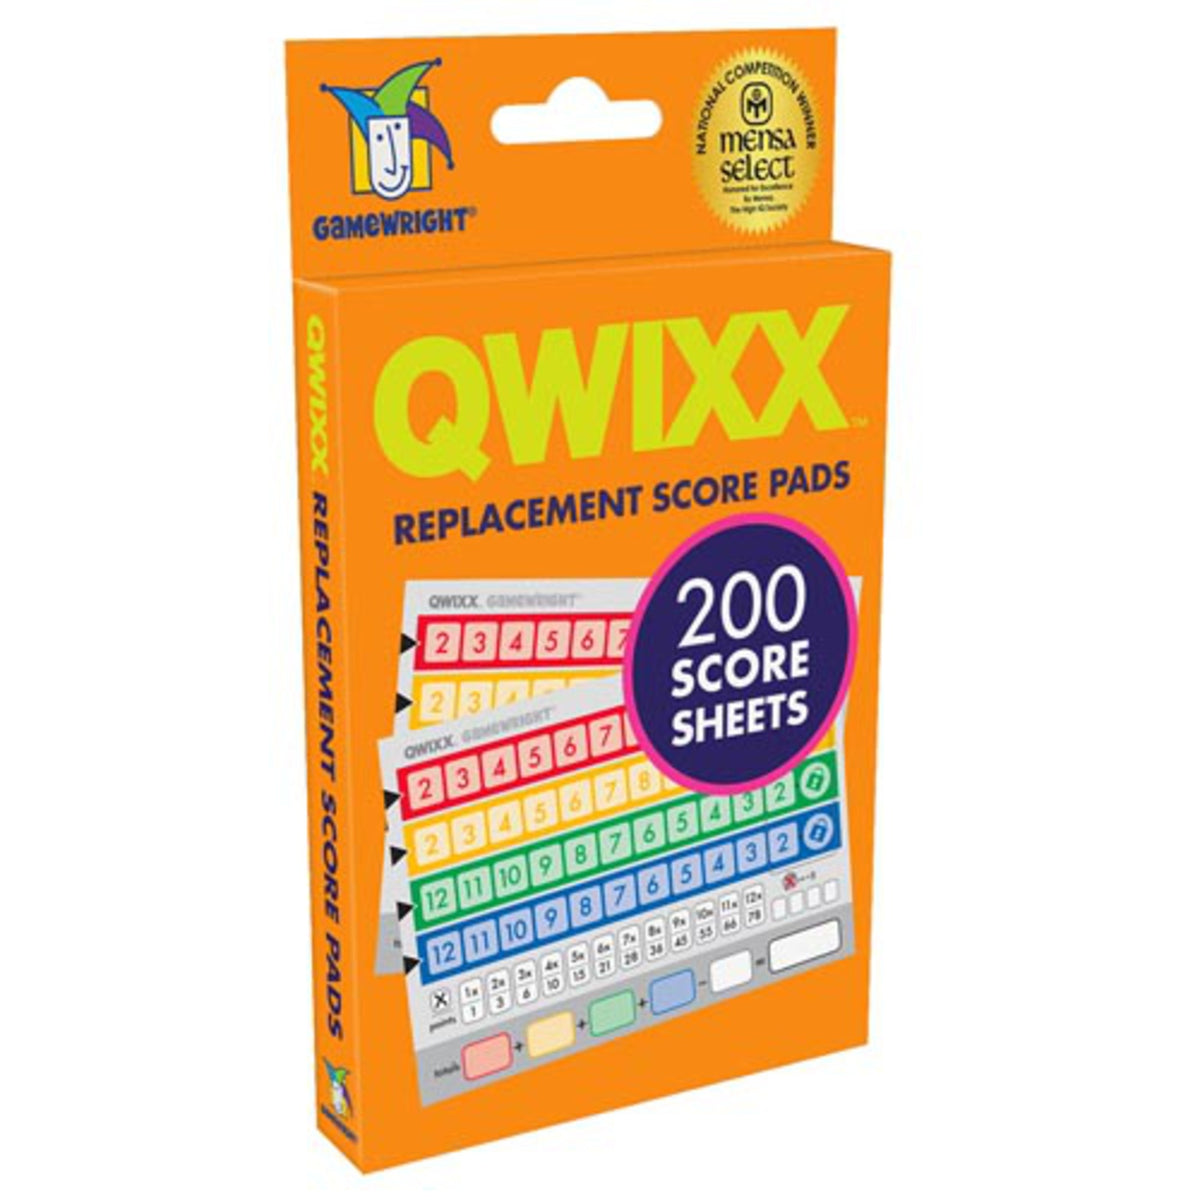 Qwixx Score Pads Cover